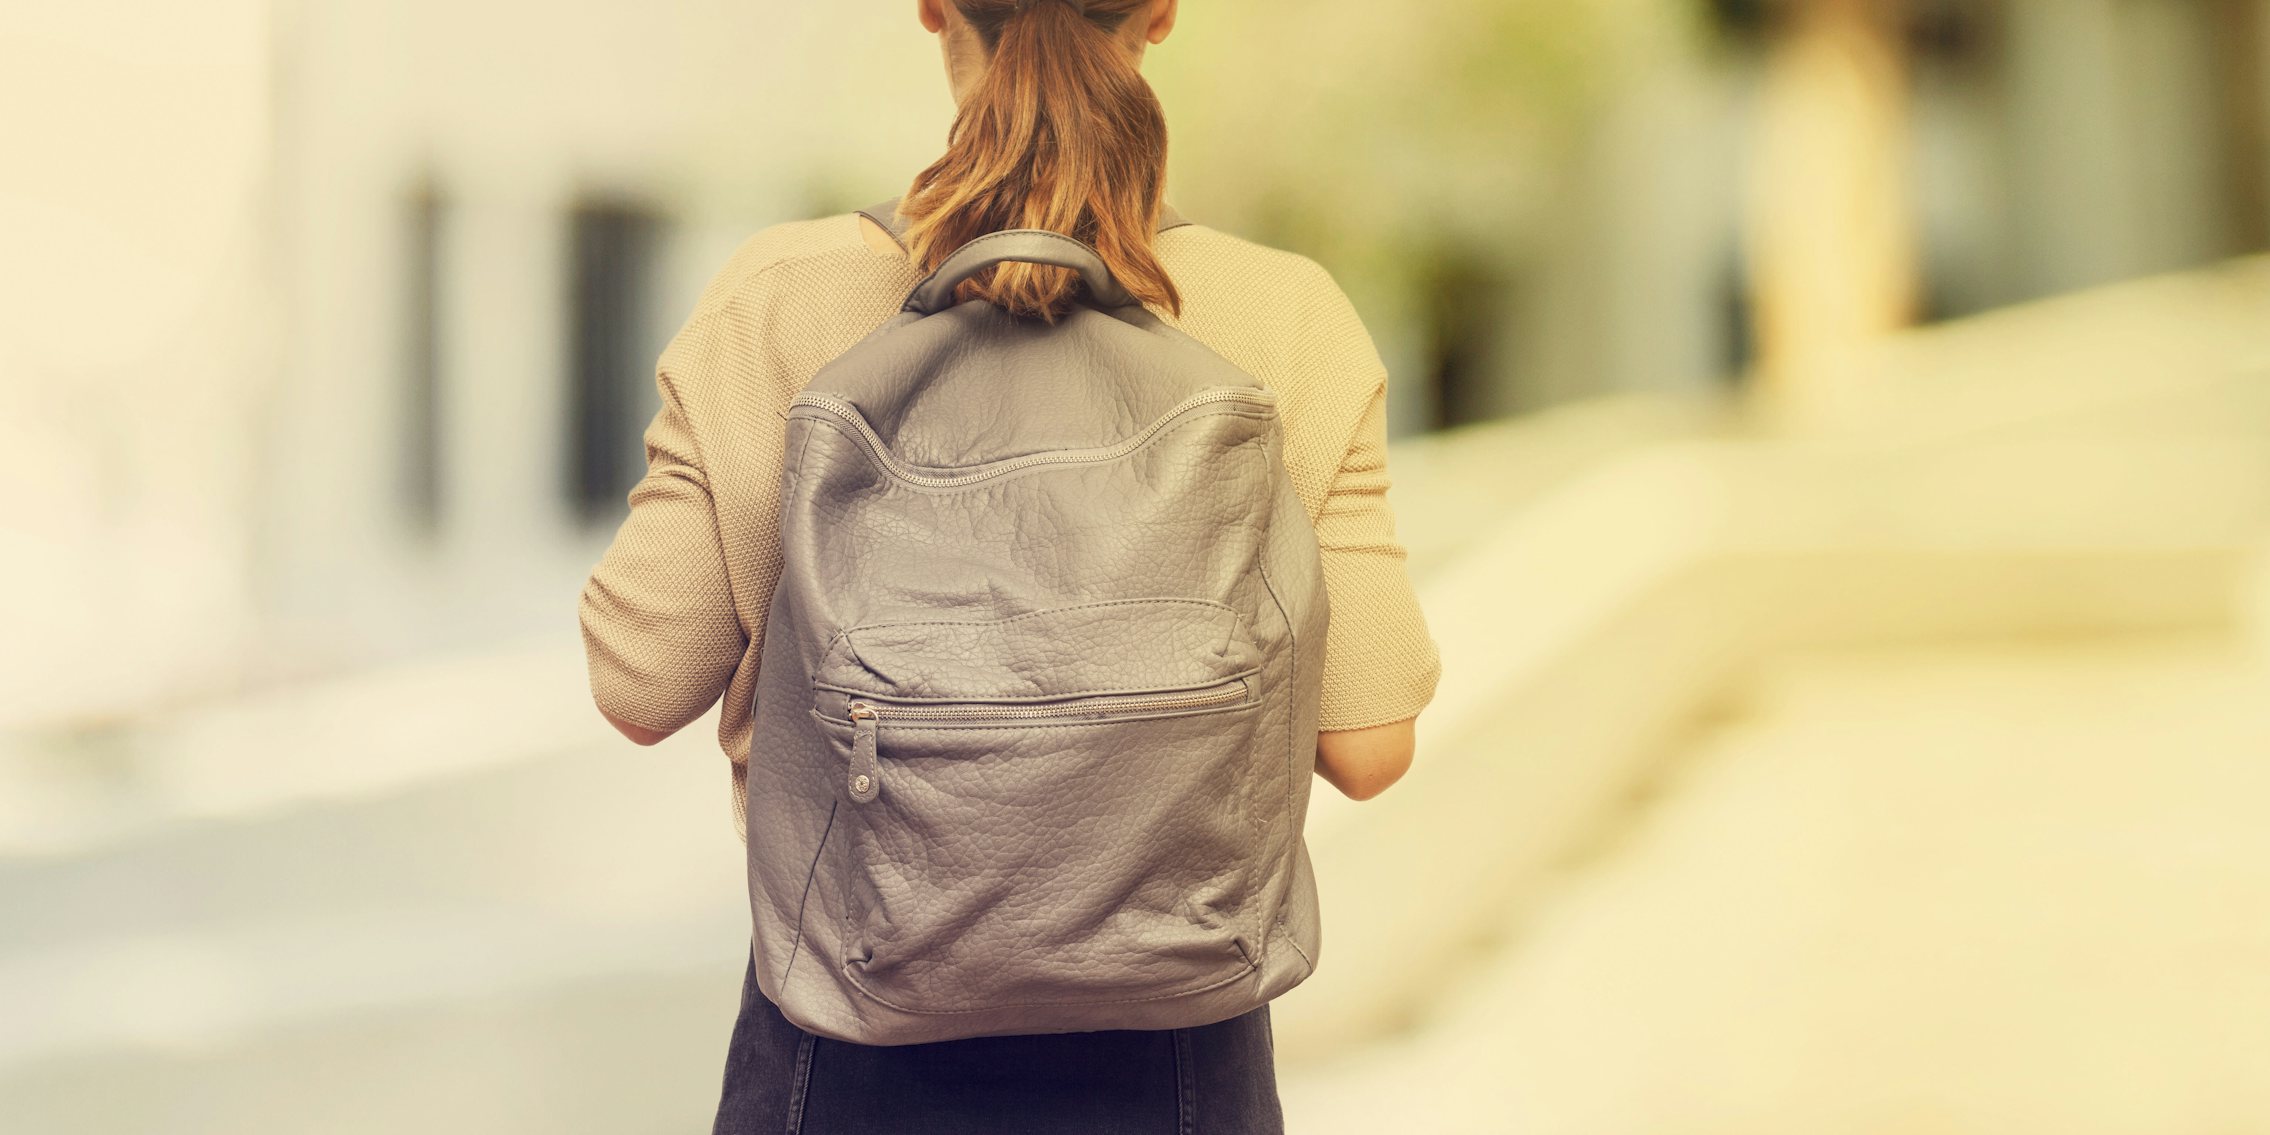 student, girl, backpack, campus, school